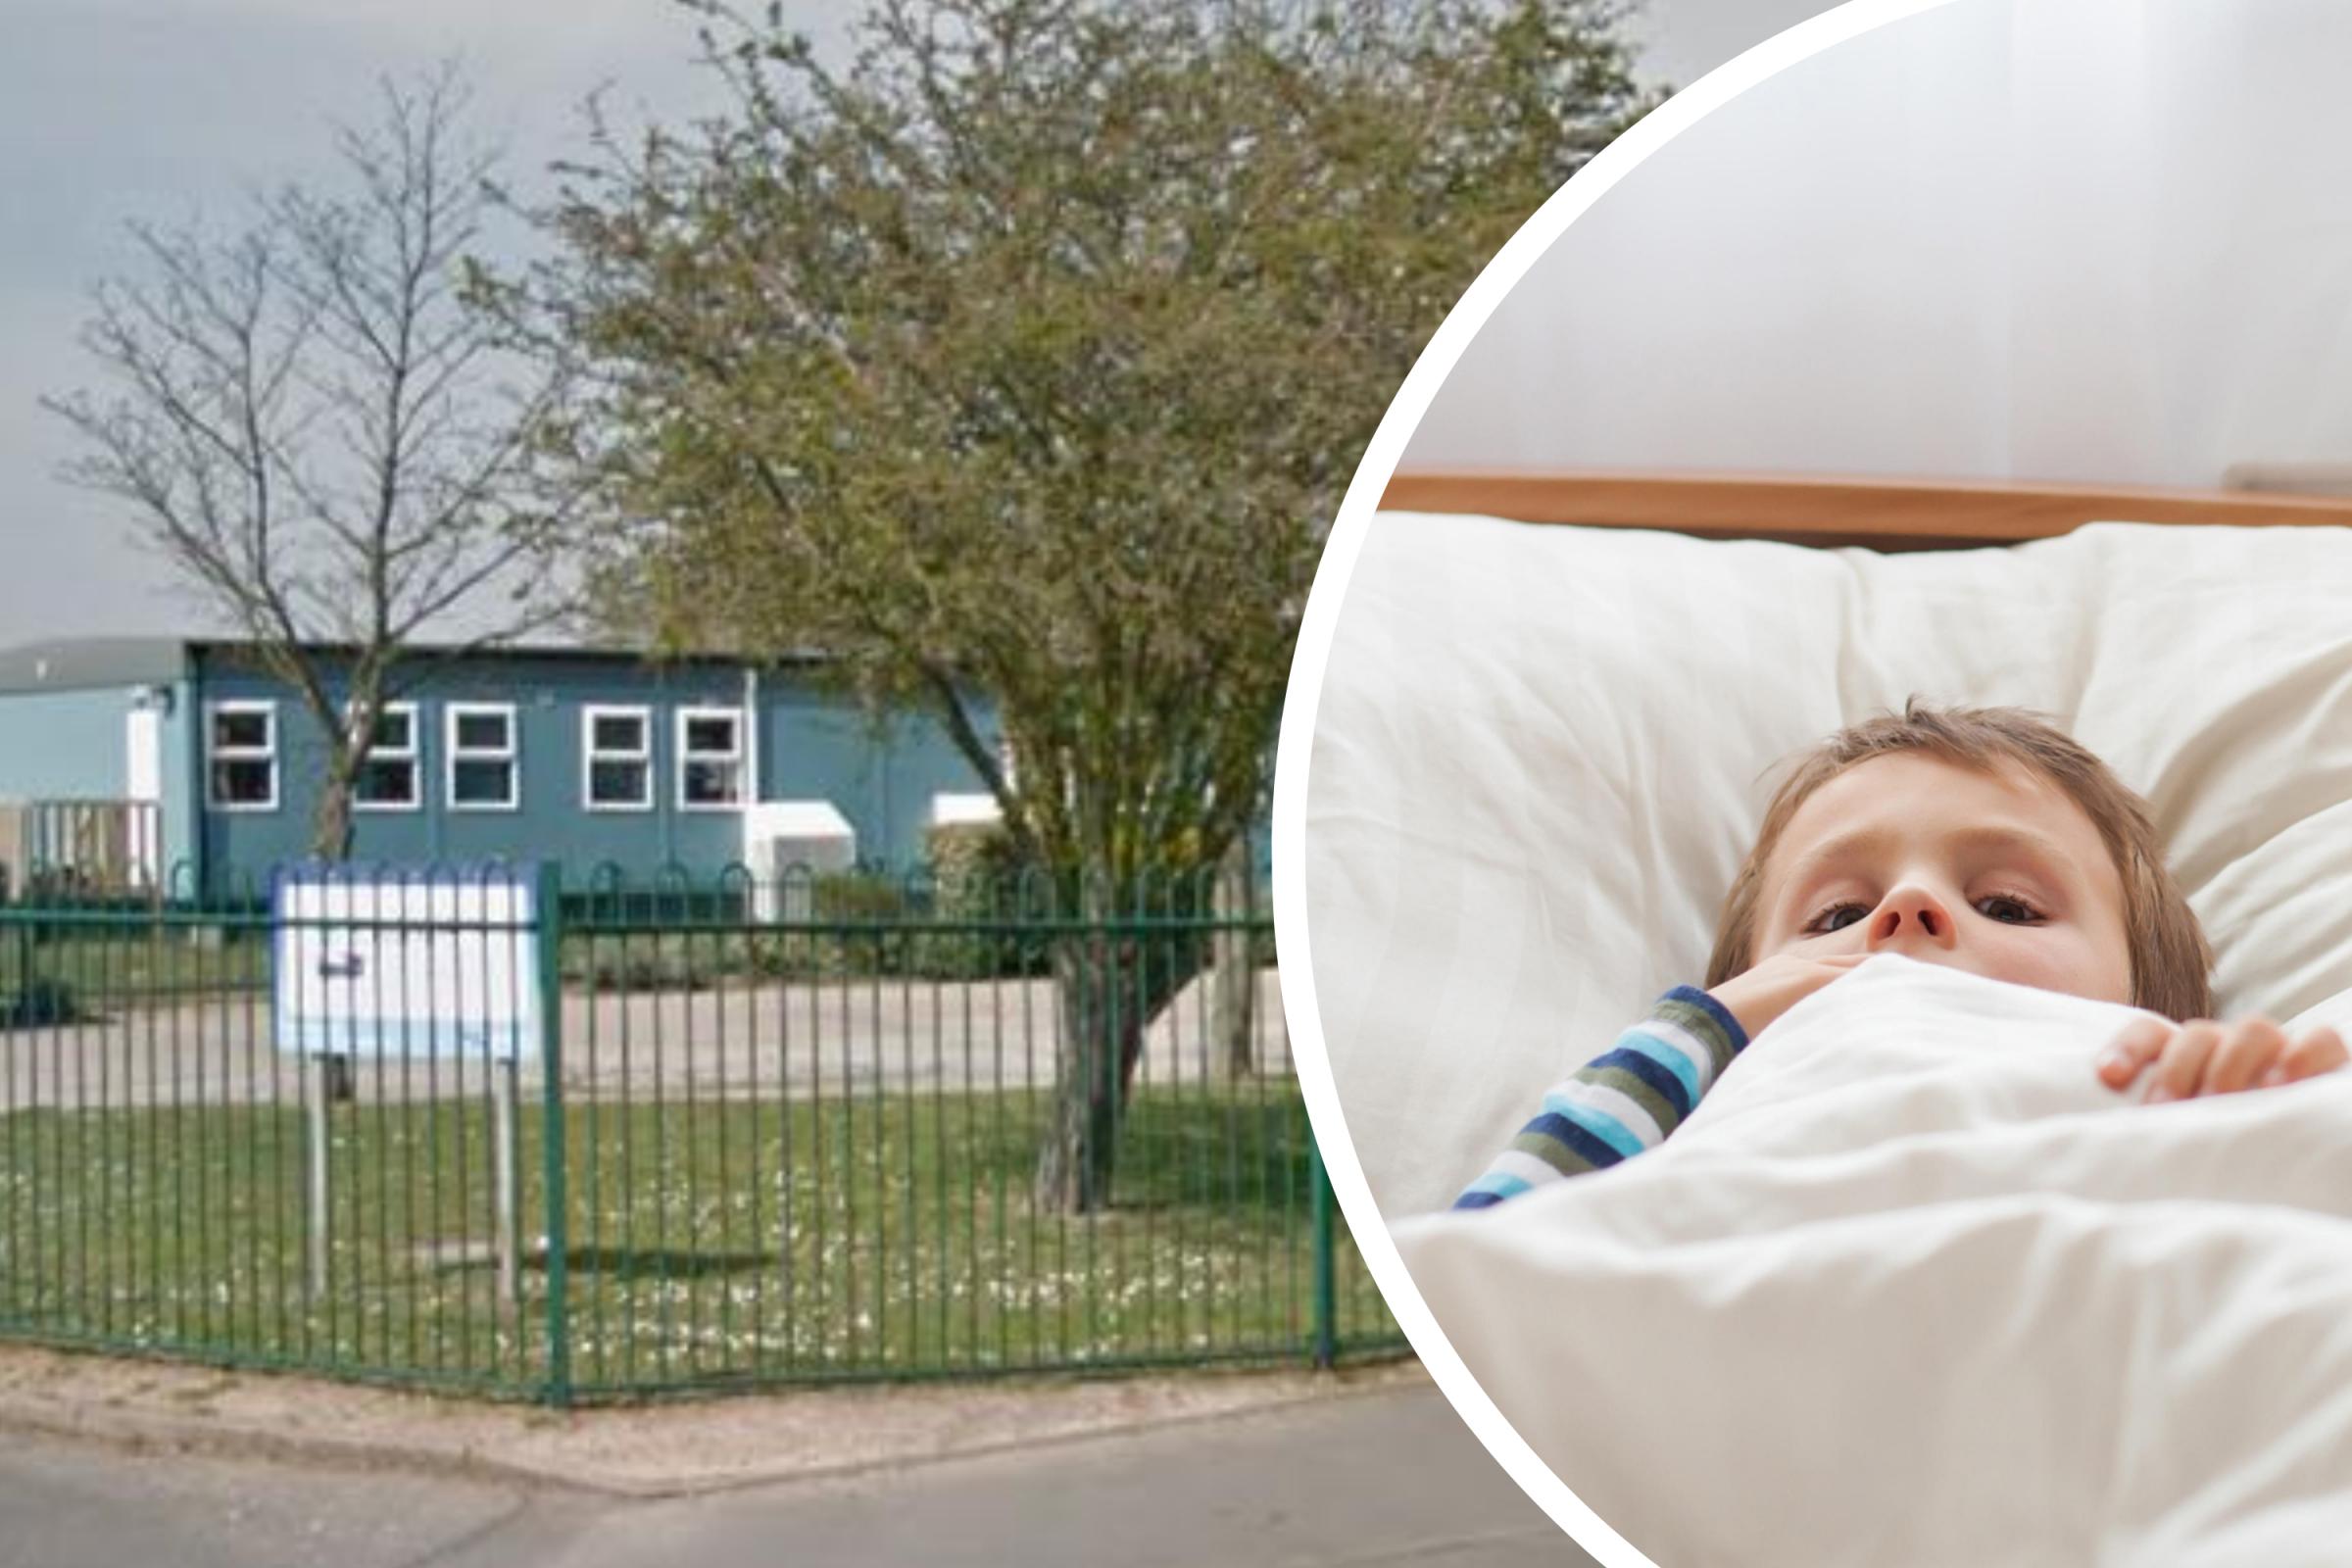 Walton primary school pupil diagnosed with Strep A infection